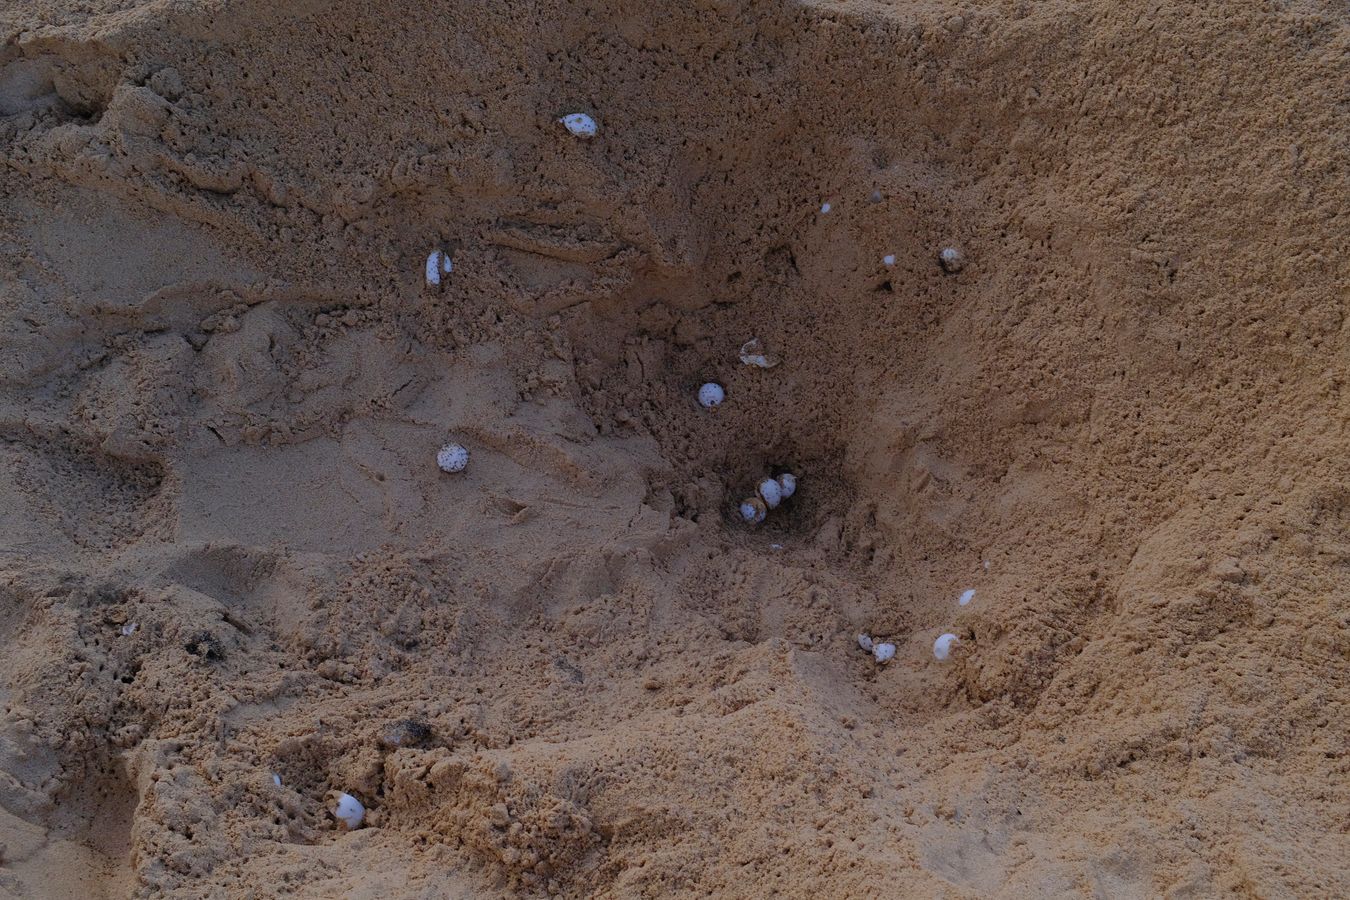 Sea turtle eggs with a certain incubation time that have been accidentally removed from their nest by a turtle when digging to spawn.